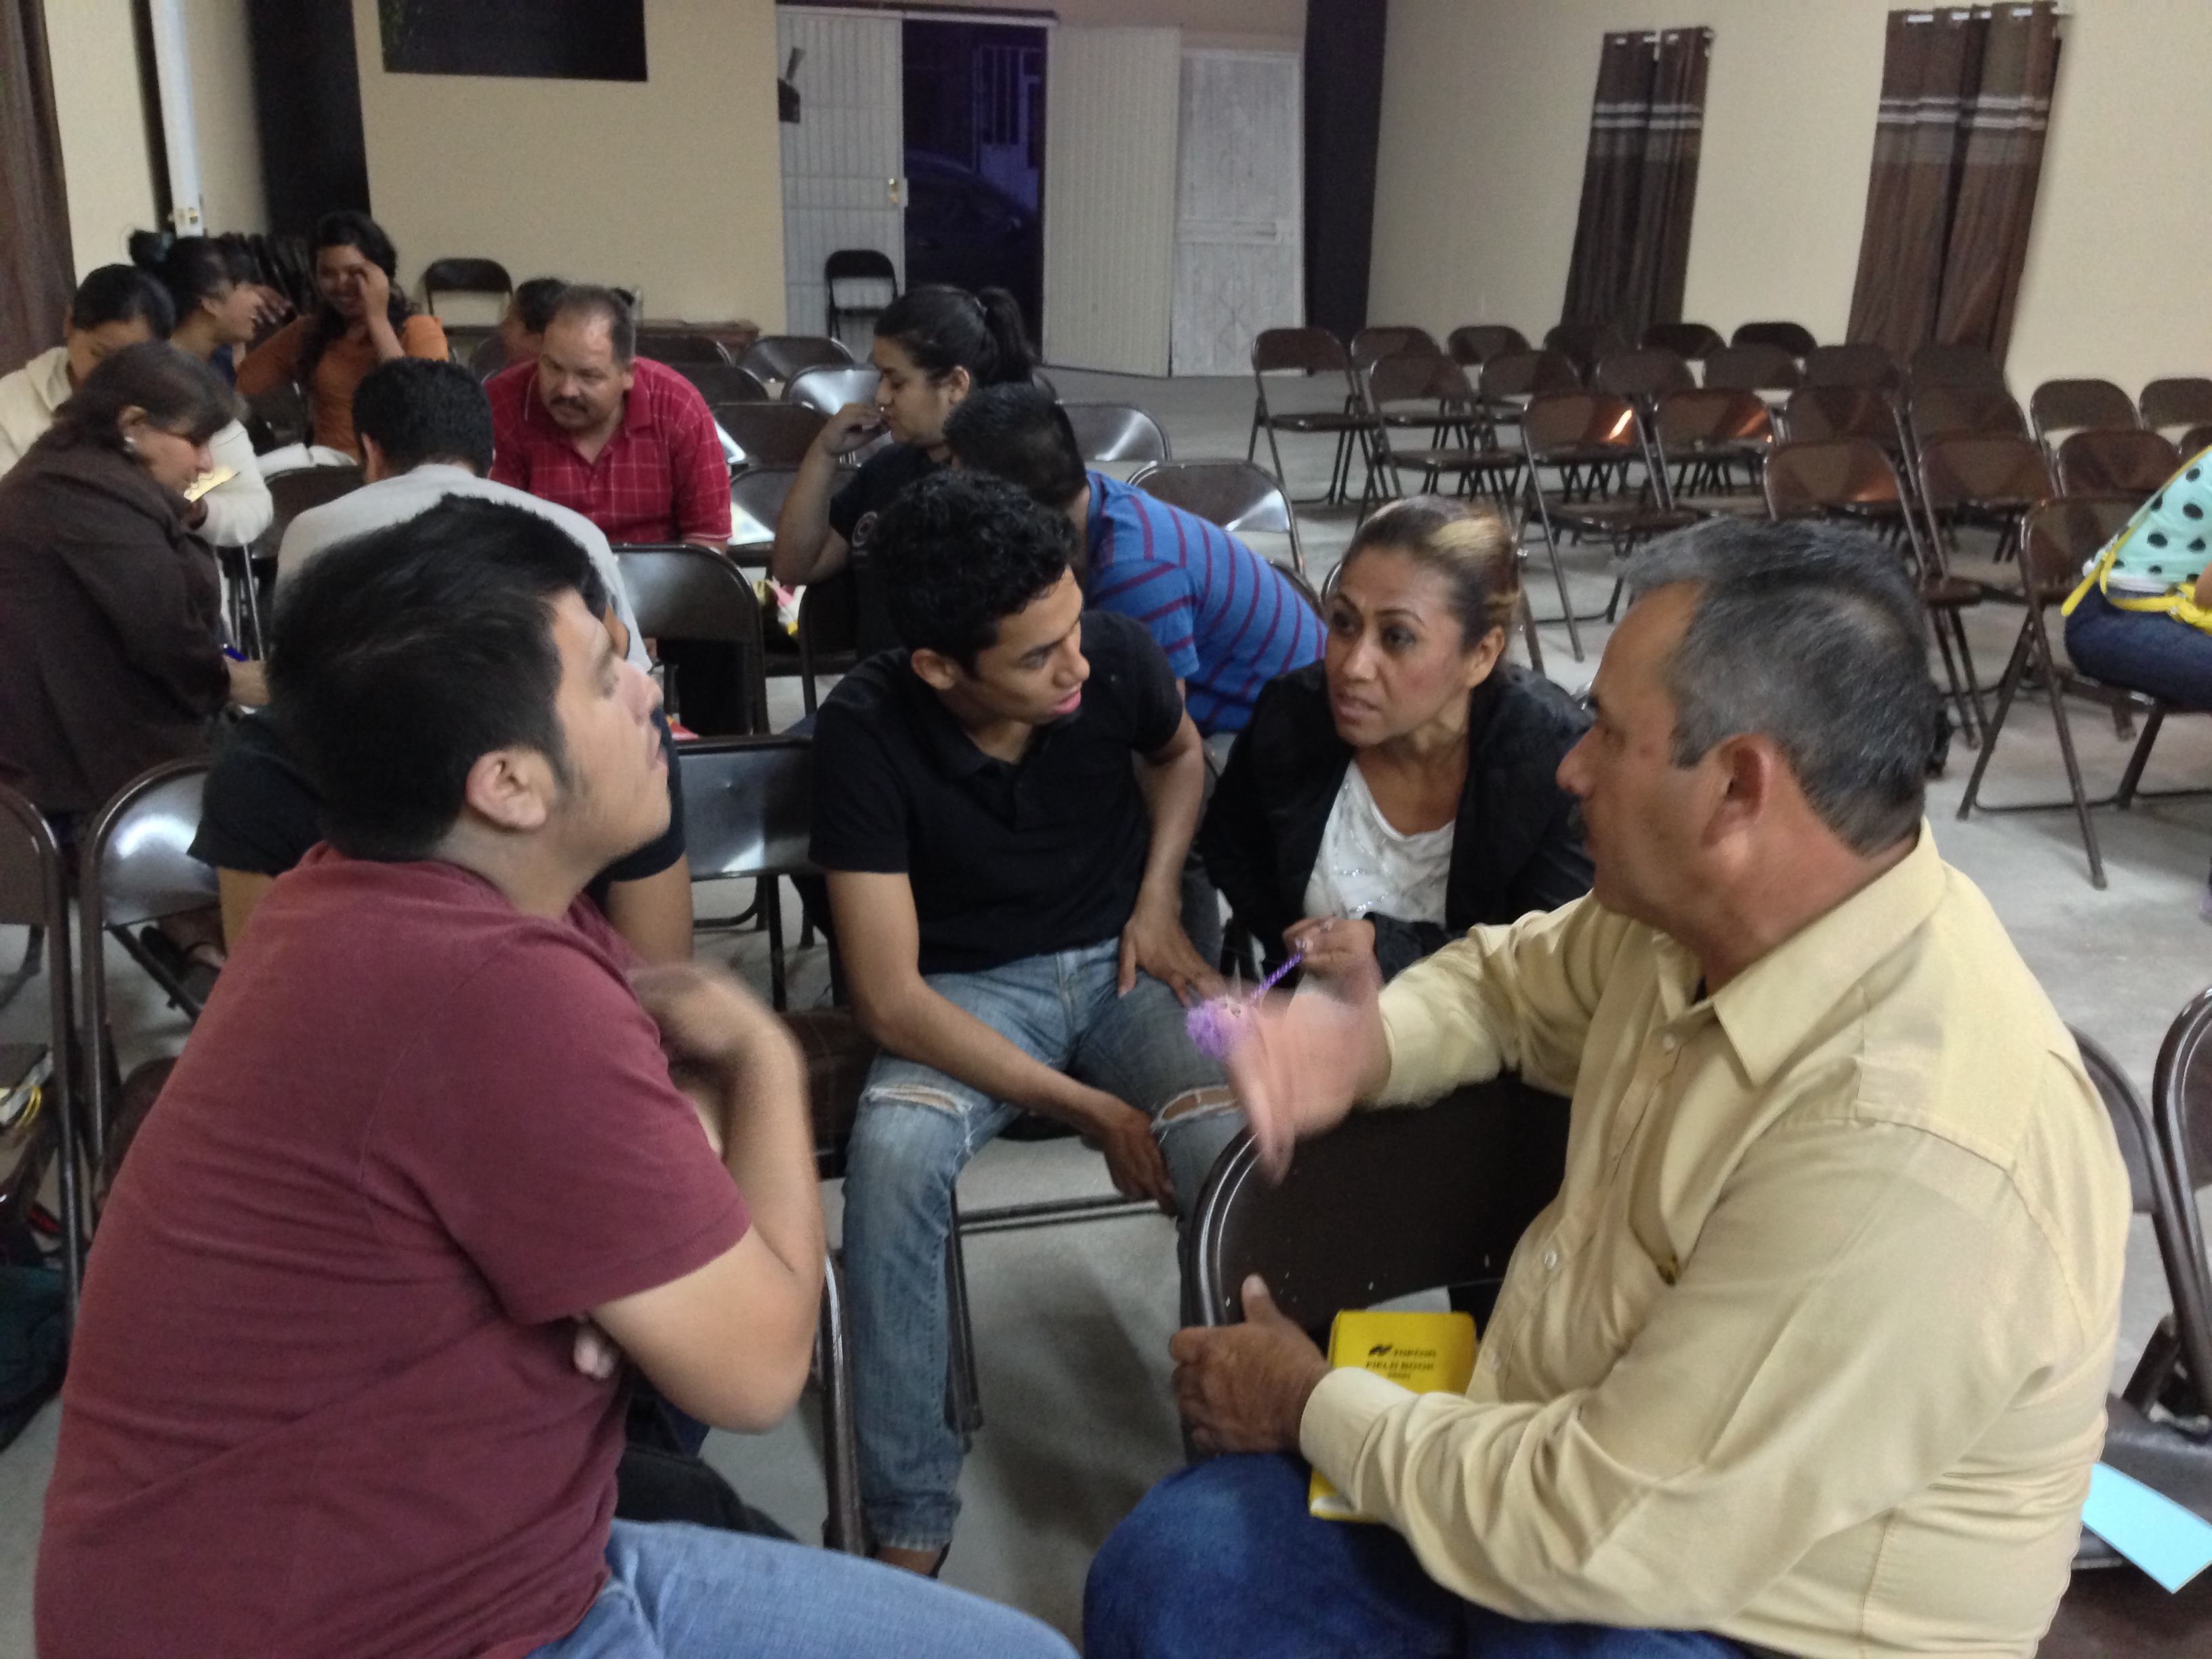 Pastor Mauro and his wife in a small group discussion